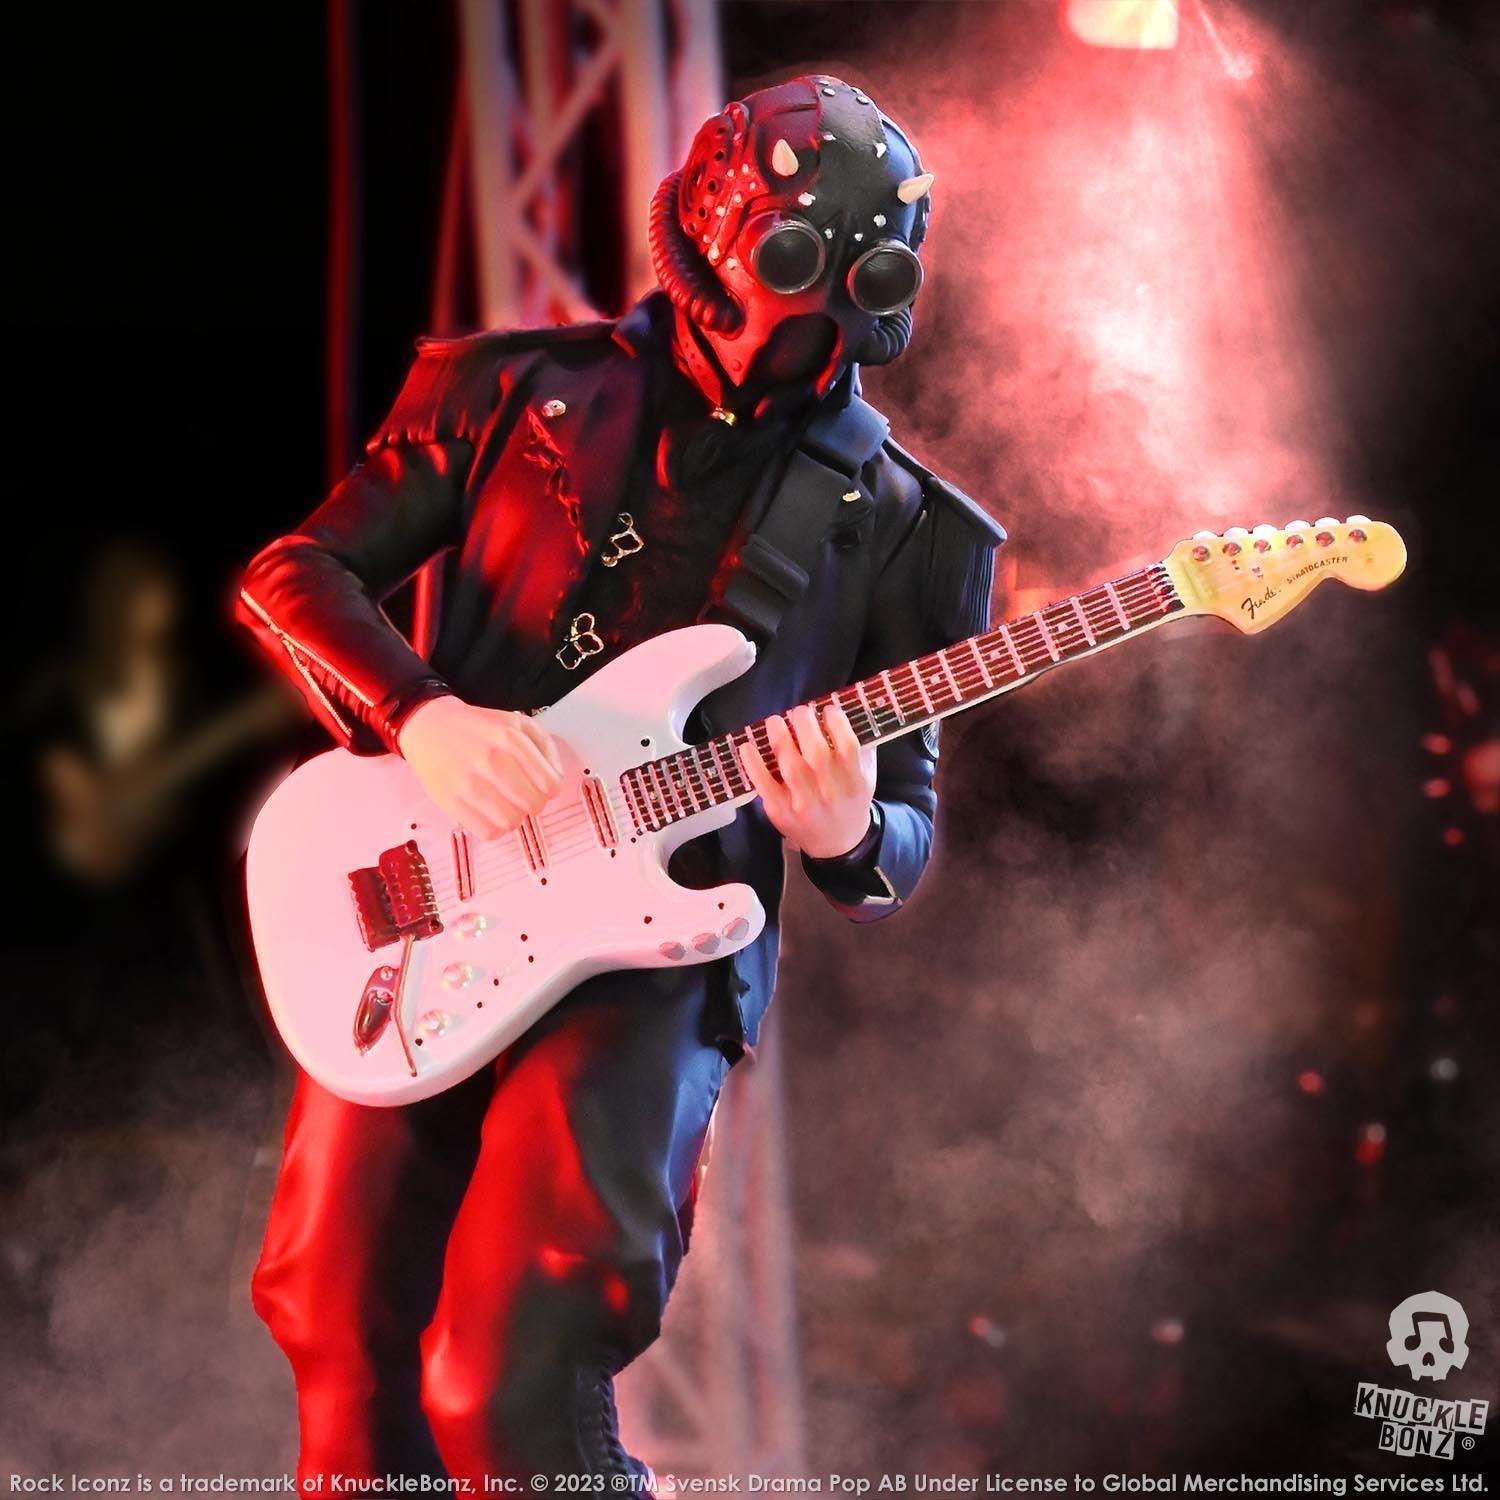 Ghost - Nameless Ghoul 2 with White Guitar Rock Iconz Statue Rock Iconz Statue by KnuckleBonz | Titan Pop Culture